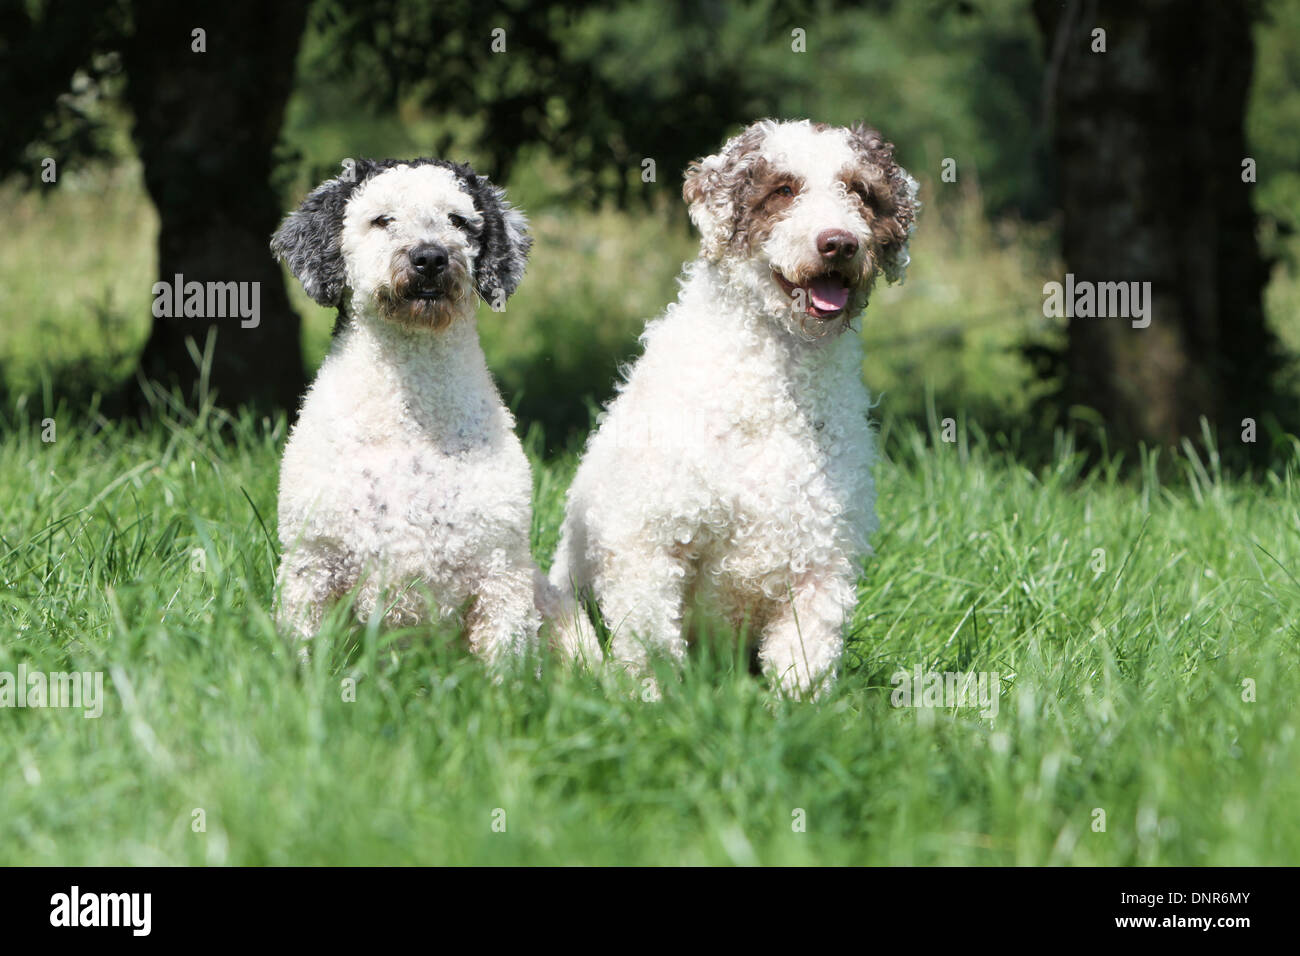 Dog Perro de Agua Espanol / Spanish Water Dog  two adults (different colors) sitting in a garden Stock Photo